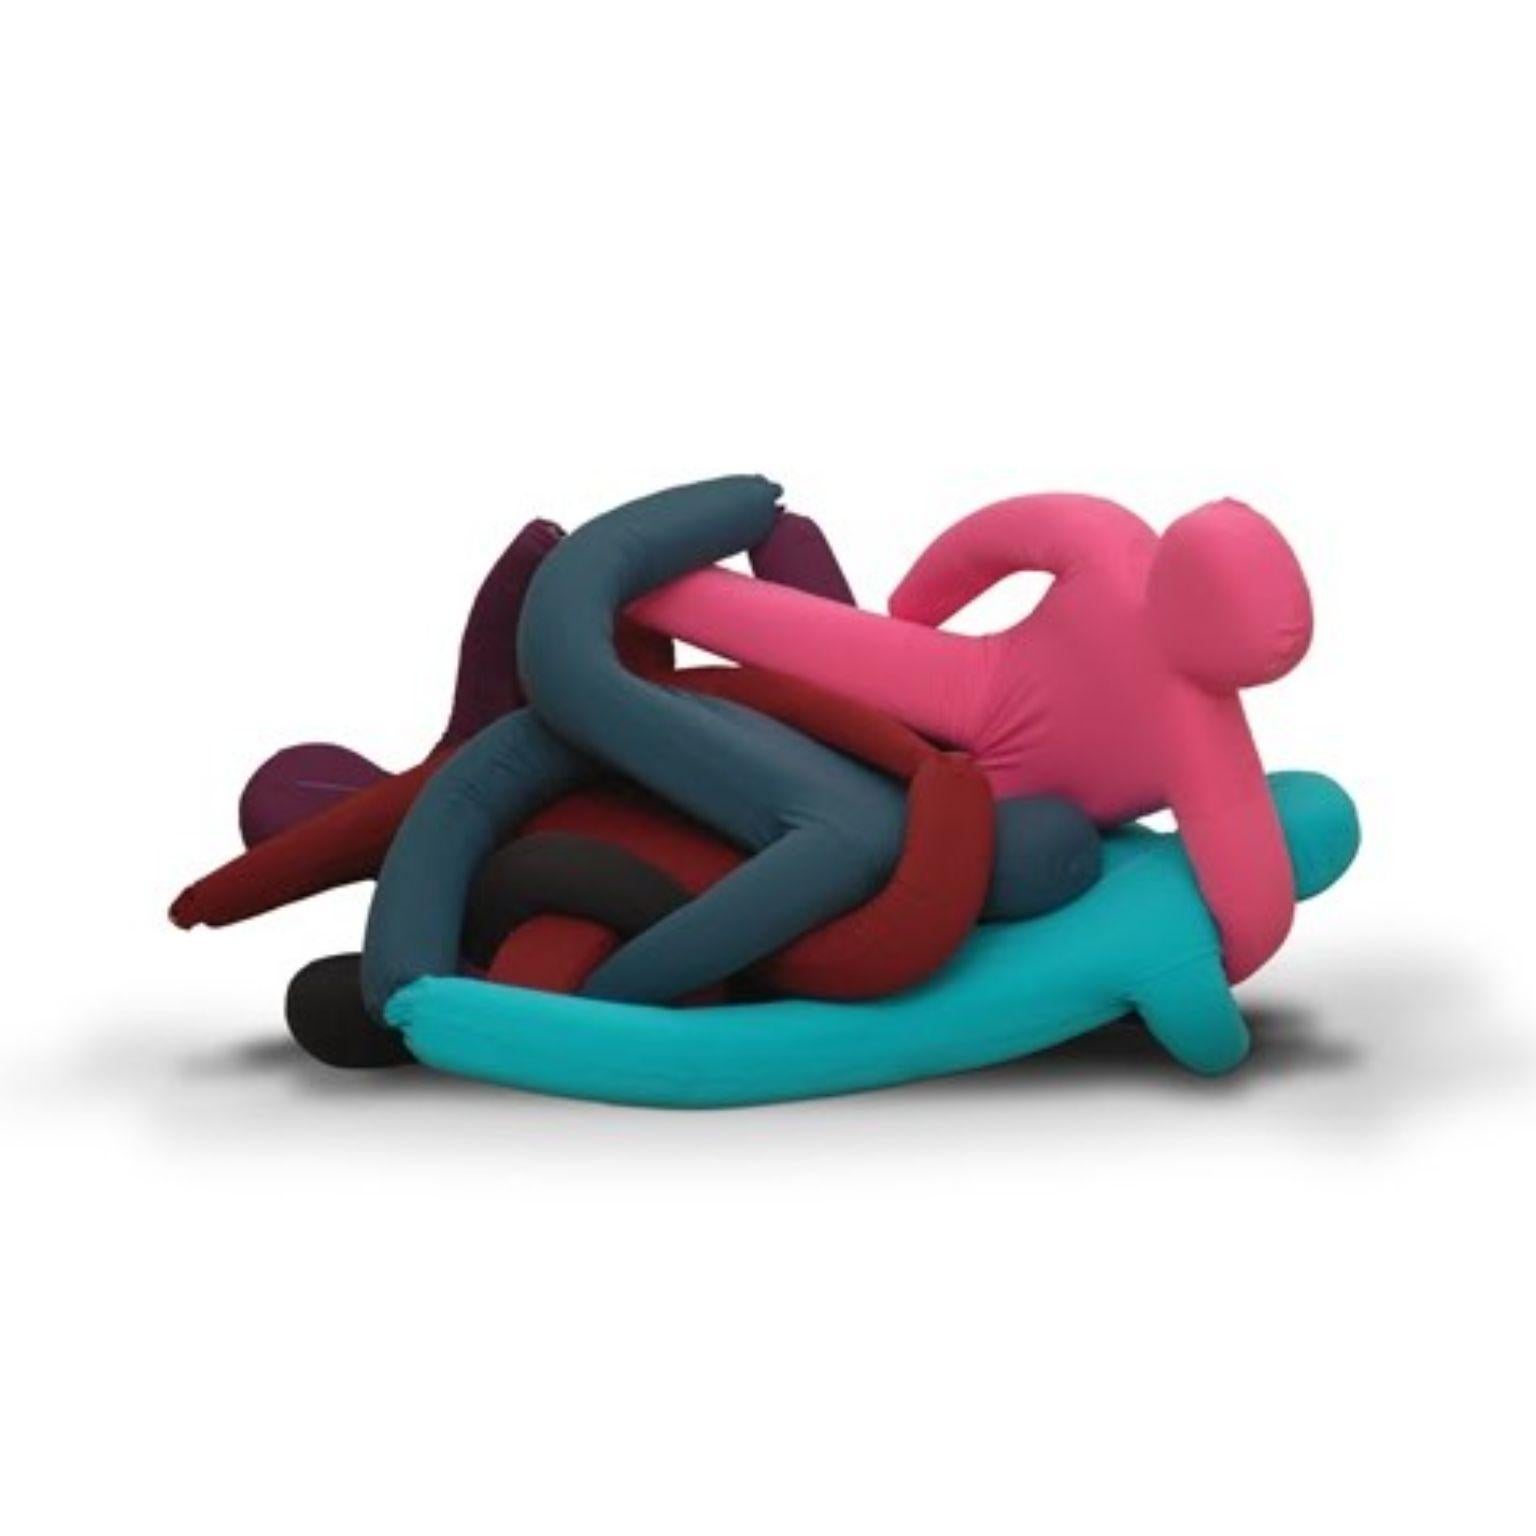 Corpo Colectivo seating by Mameluca
Material: assorted foam, elastic fabric
Dimensions: D 180 x W 120 x H 60 cm

It’s form of intertwined bodies suggests a gathering, a touch, a group hug. It is soft and cozy furniture, that can be used to sit,